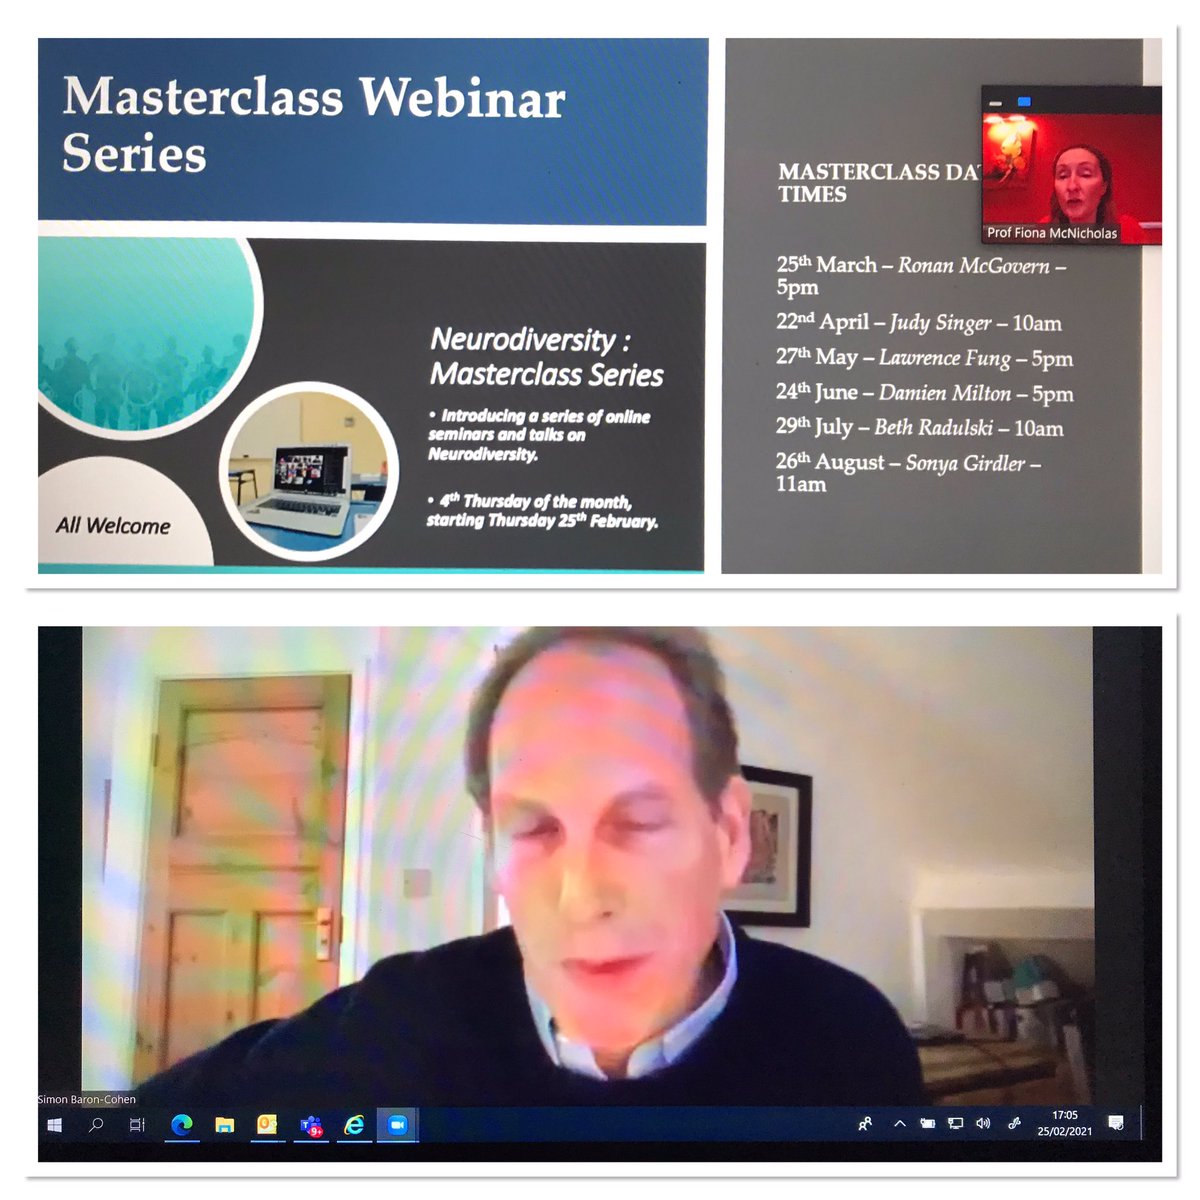 Very excited to be attending 1st neurodiversity masterclass webinar - fascinating talk re #patternseekers by @sbaroncohen thankyou @UCD_CHAS